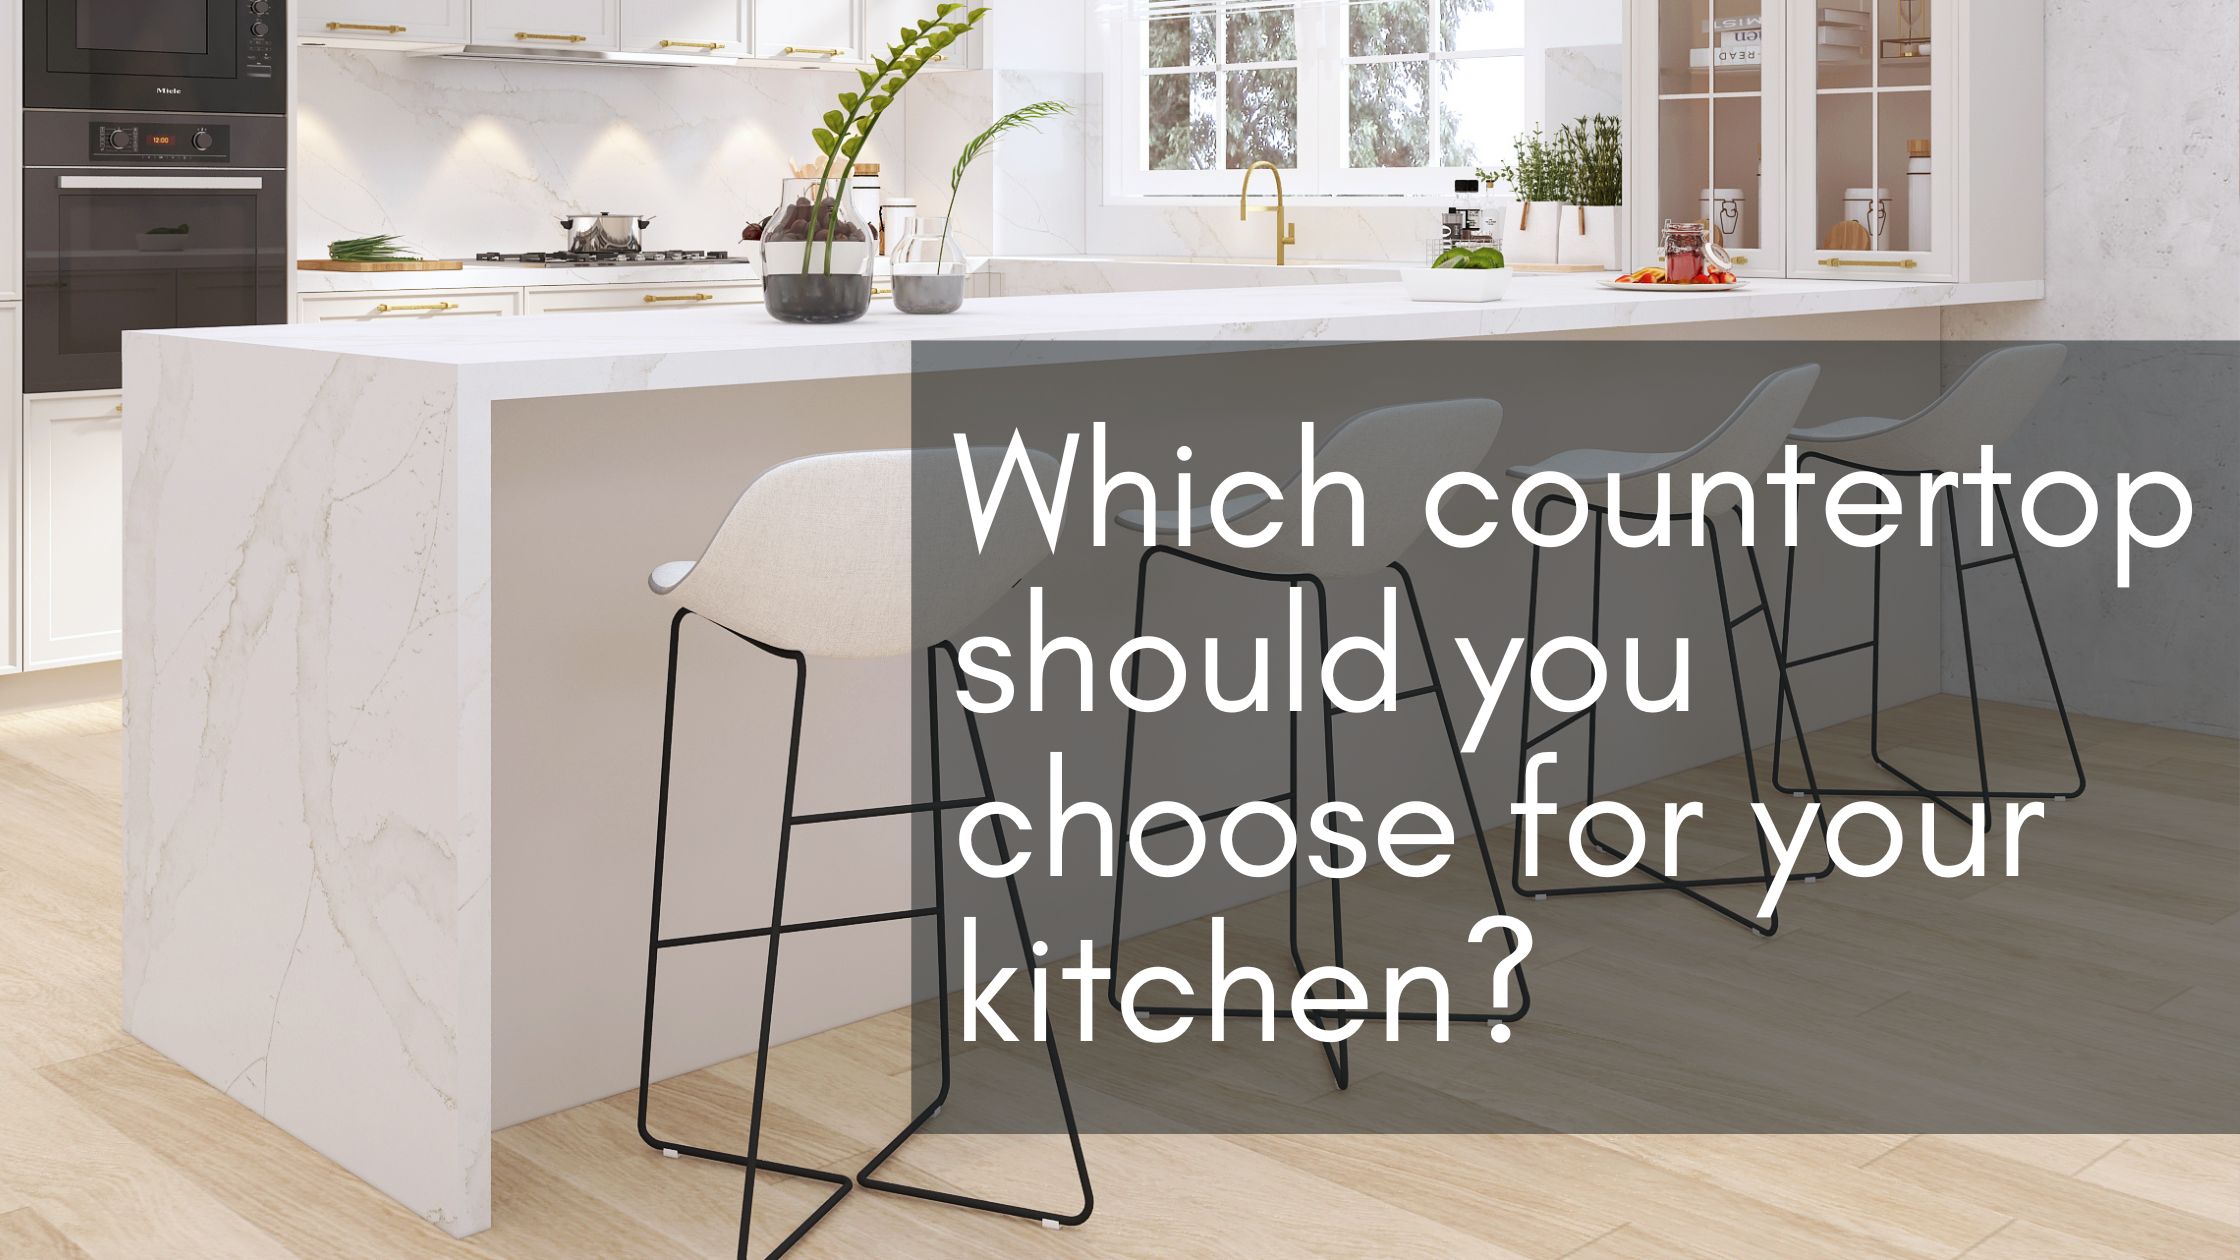 Which countertop should you choose for your kitchen